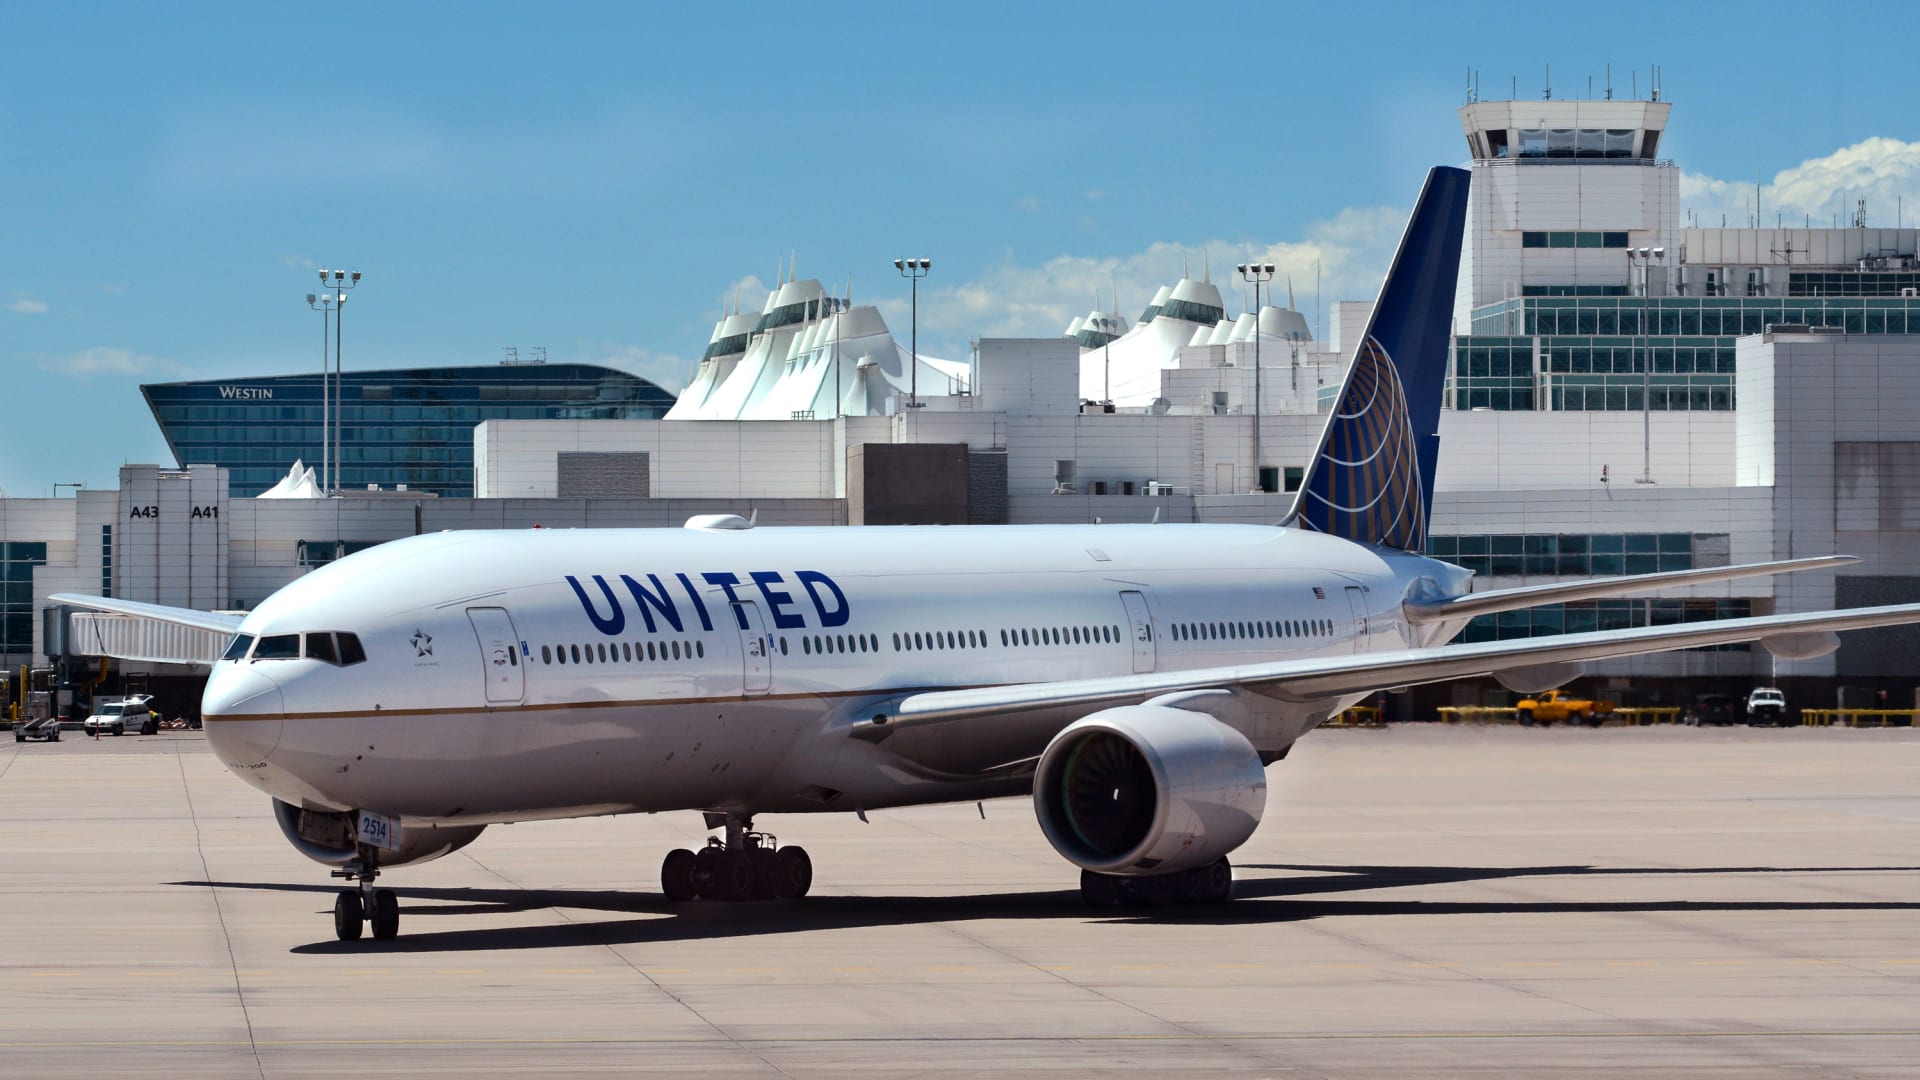 A United Airlines passenger plane taxis at Denver International Airport.